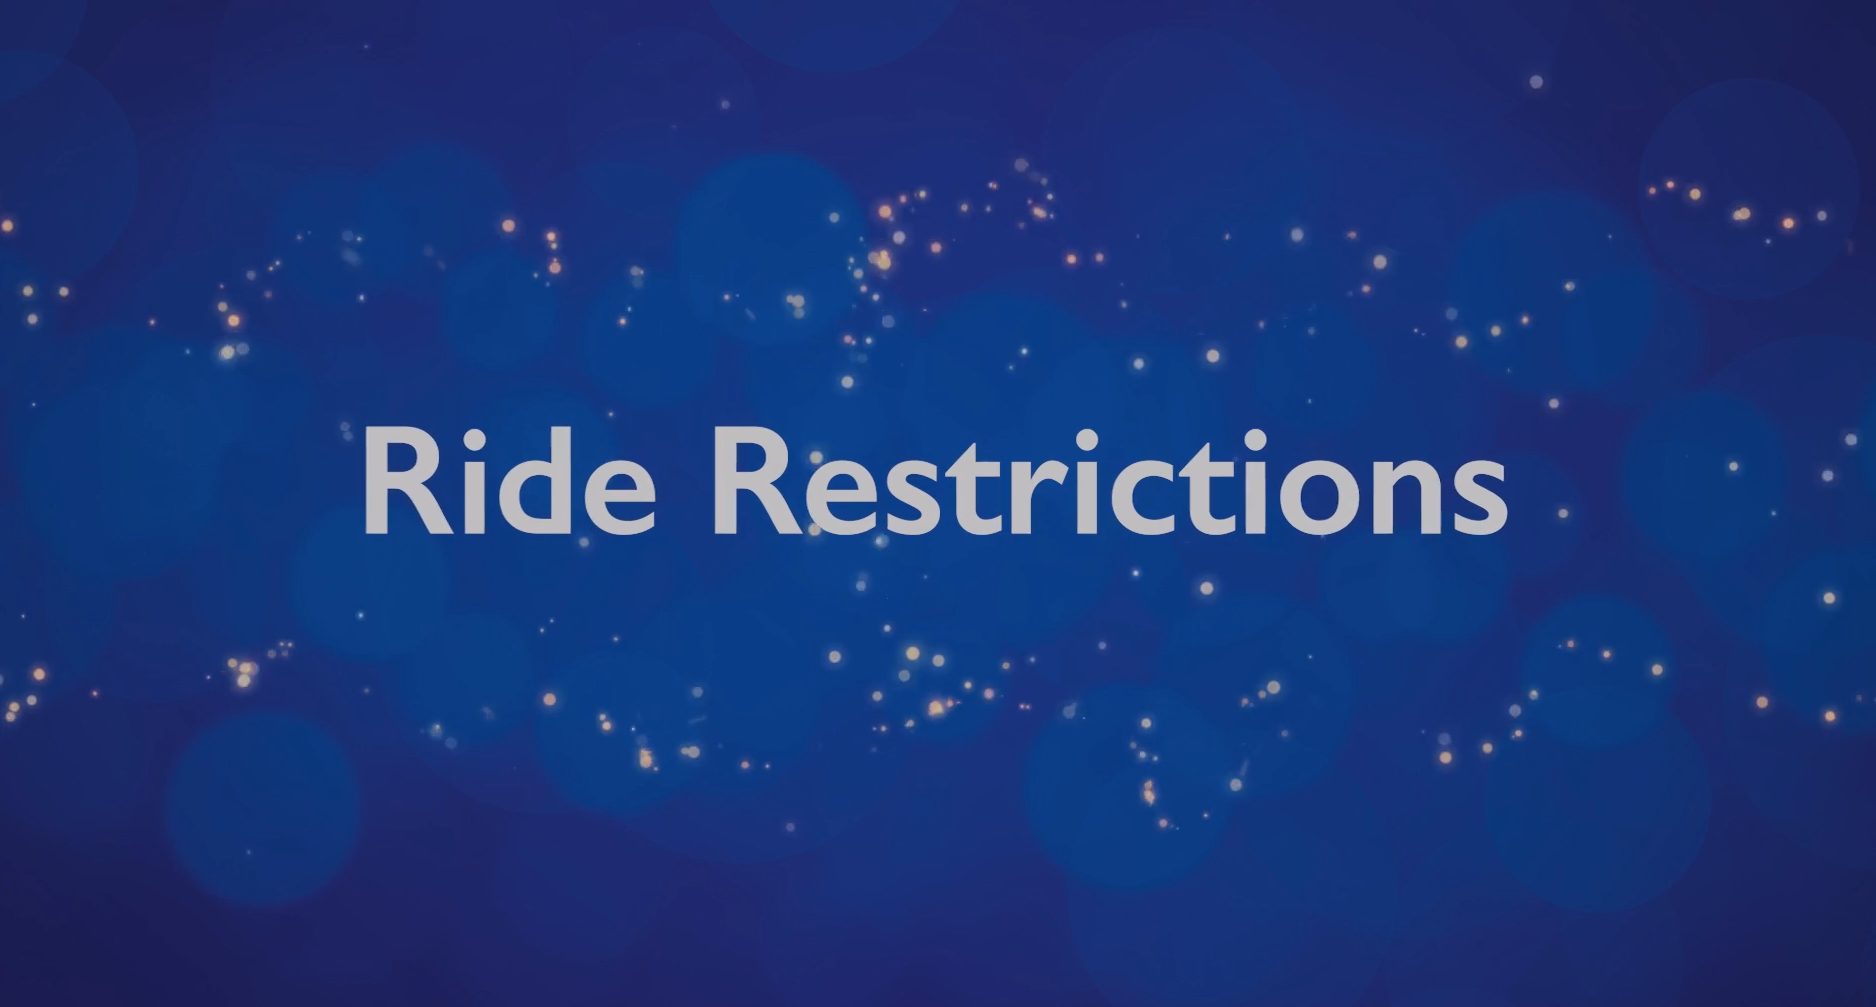 Ride Restrictions banner